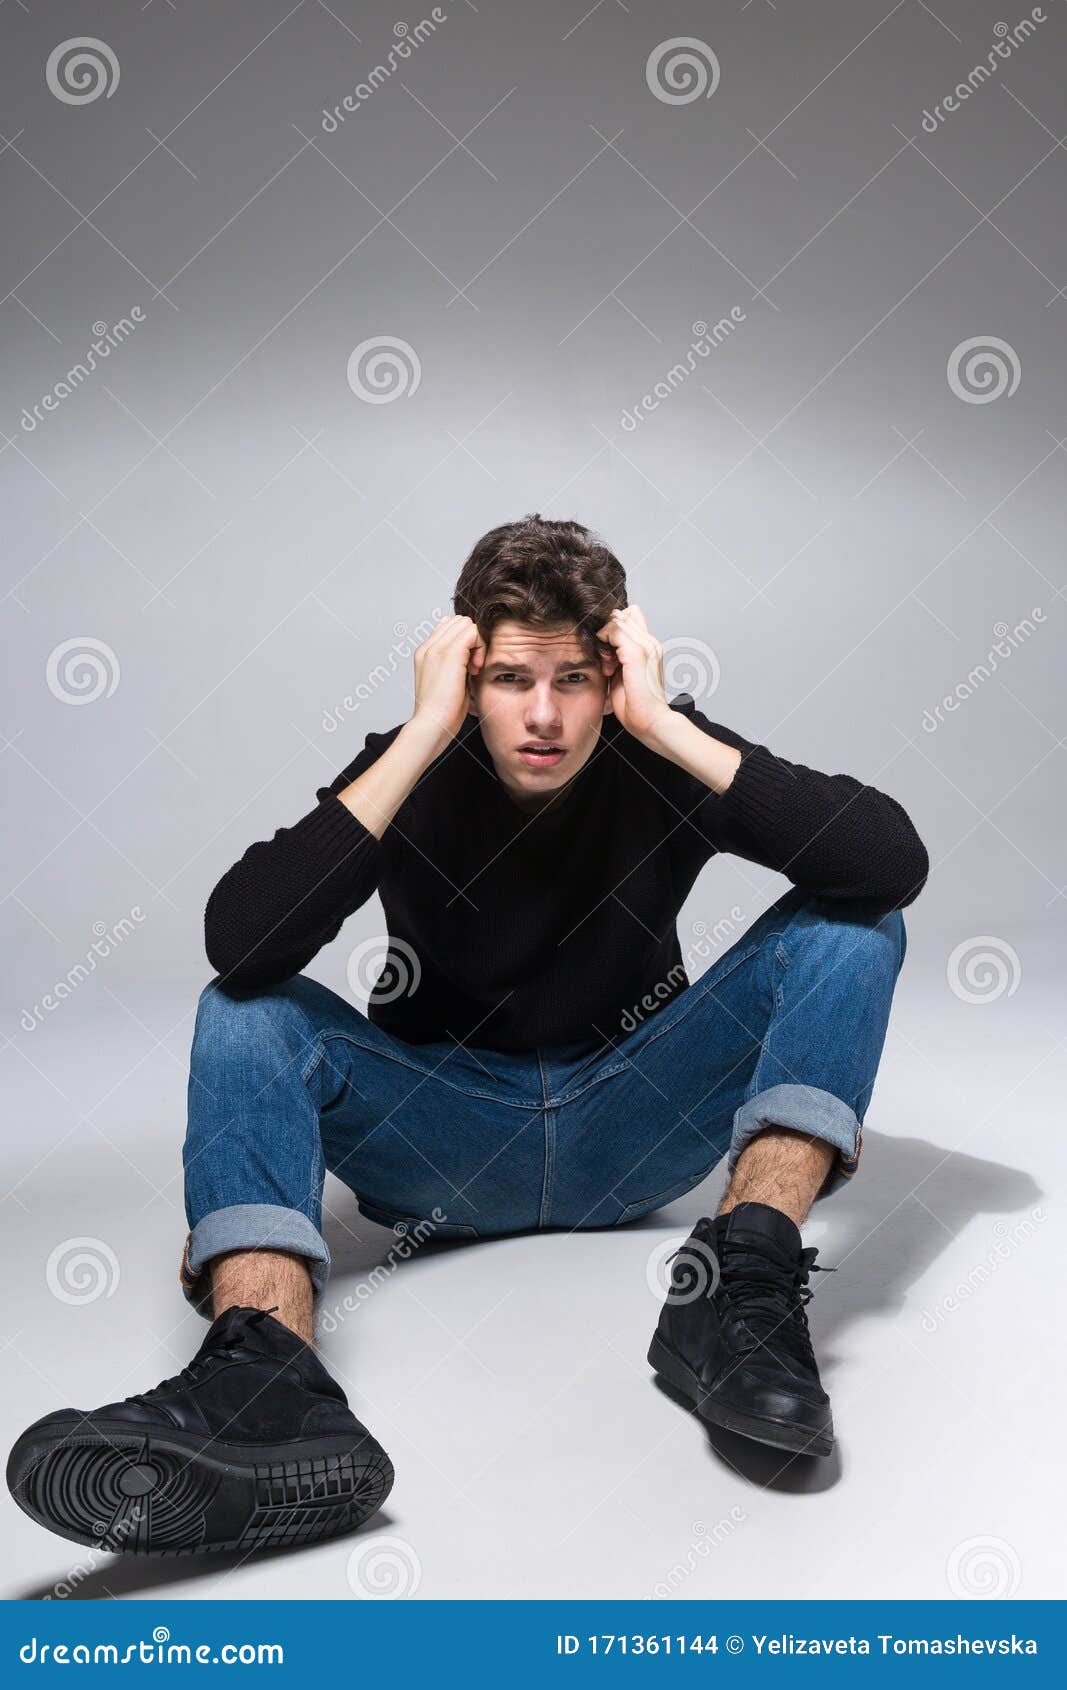 Male Pose Stock Photos, Images, & Pictures | Men casual, Men looks, Sitting  poses